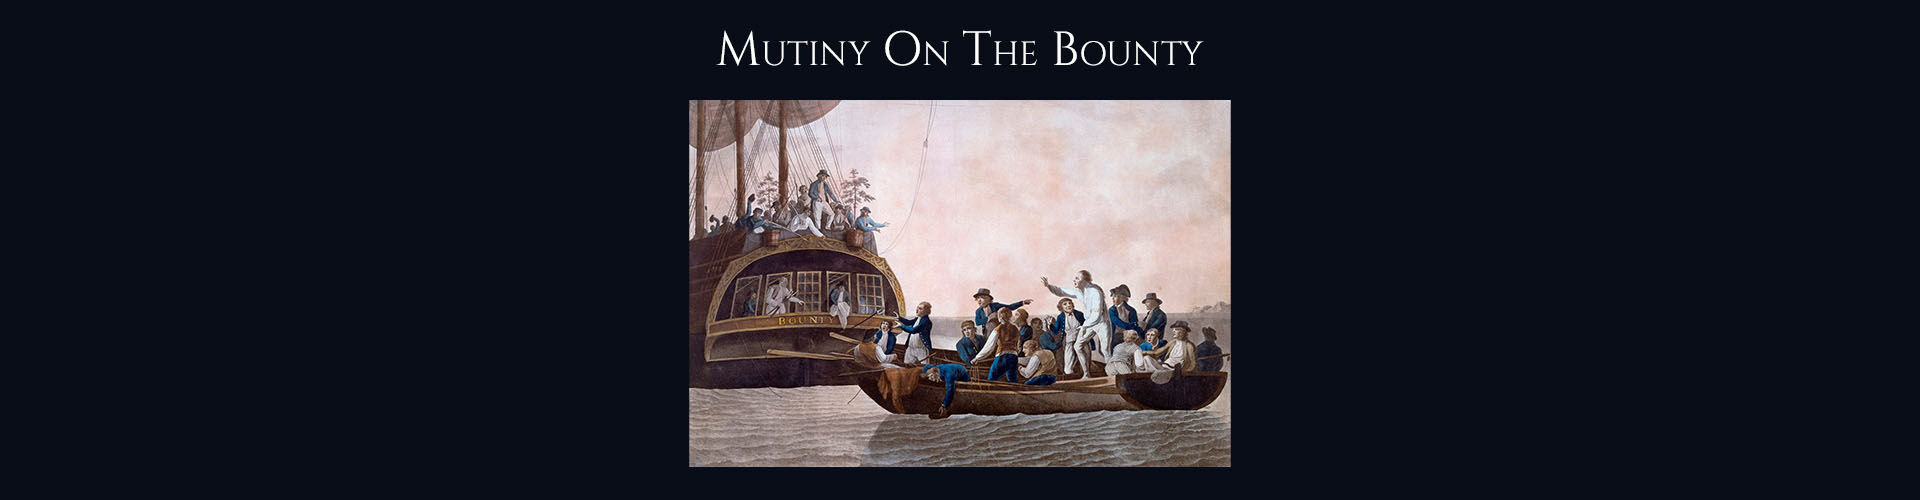 Mutiny on The Bounty - Absent Justice